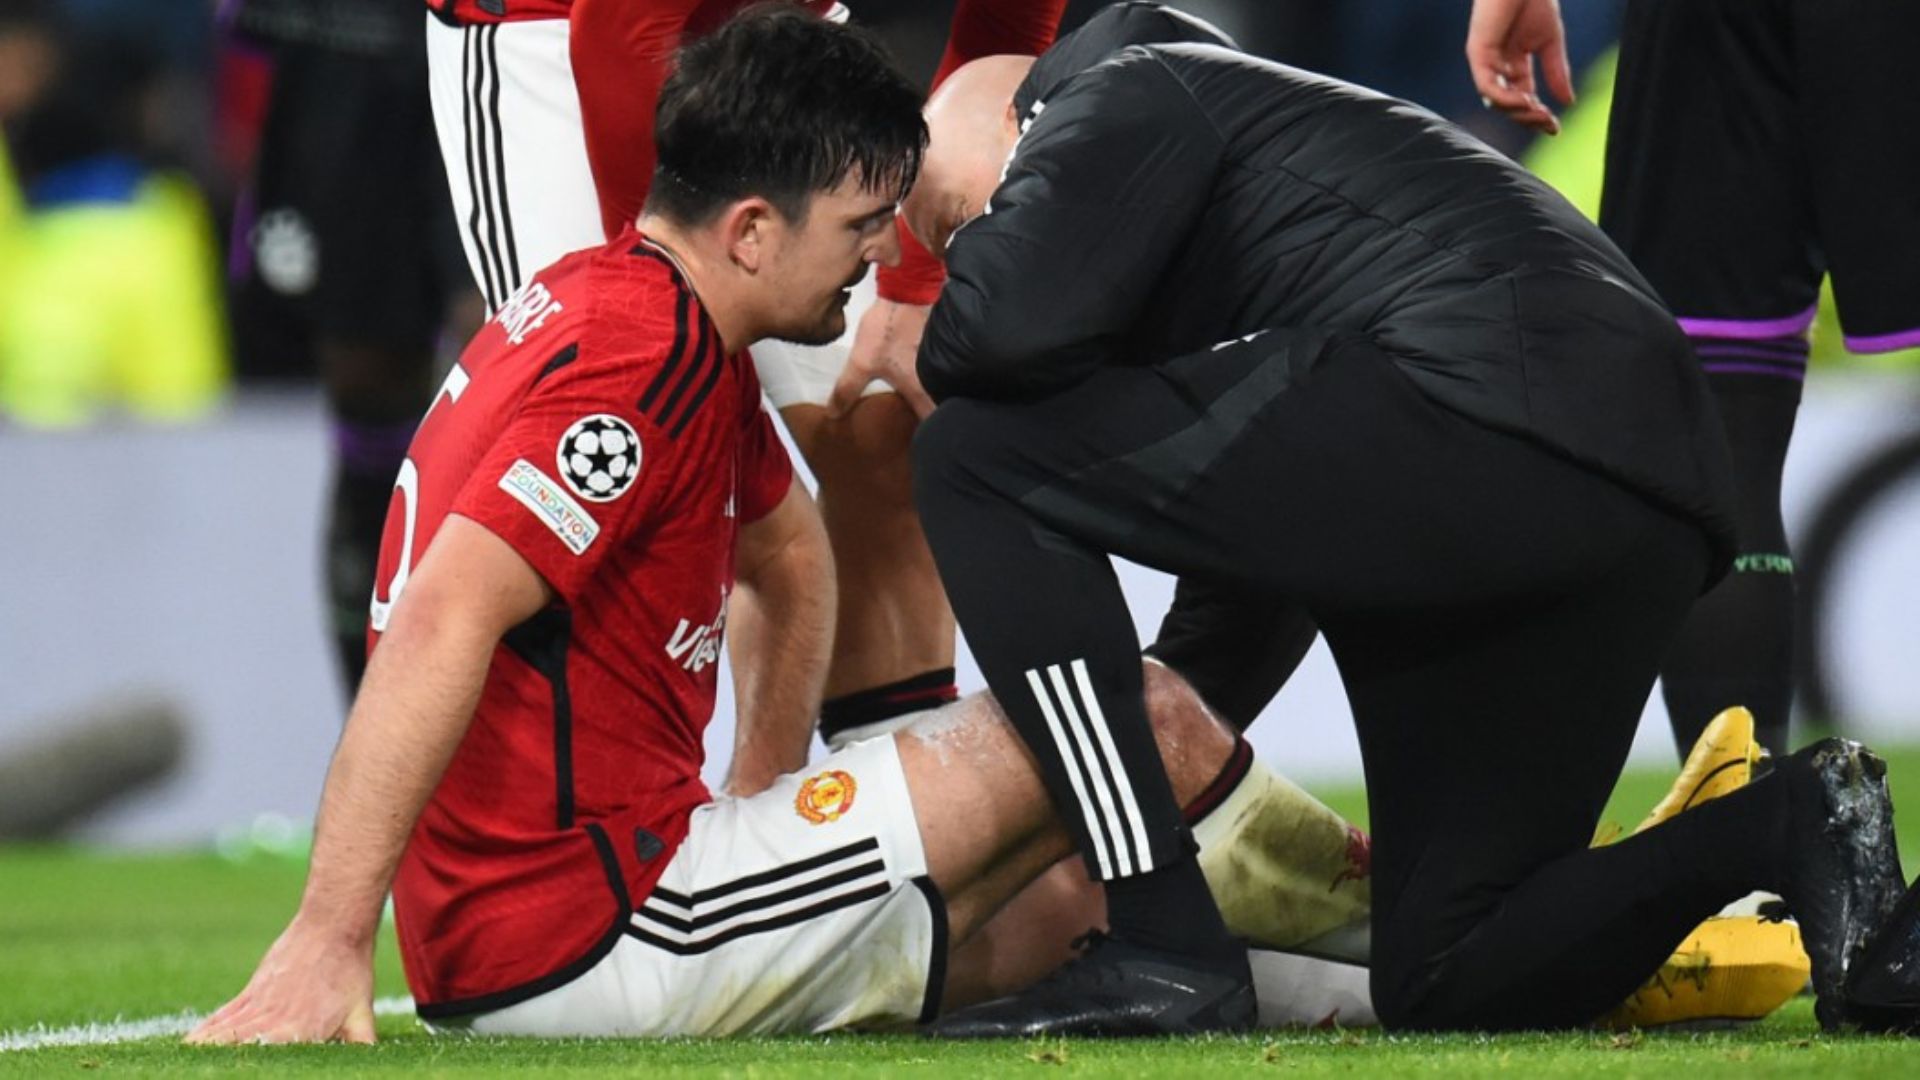 Man Utd 0-0 Bayern Munich LIVE SCORE: Latest Champions League updates as Harry Maguire FORCED OFF with injury